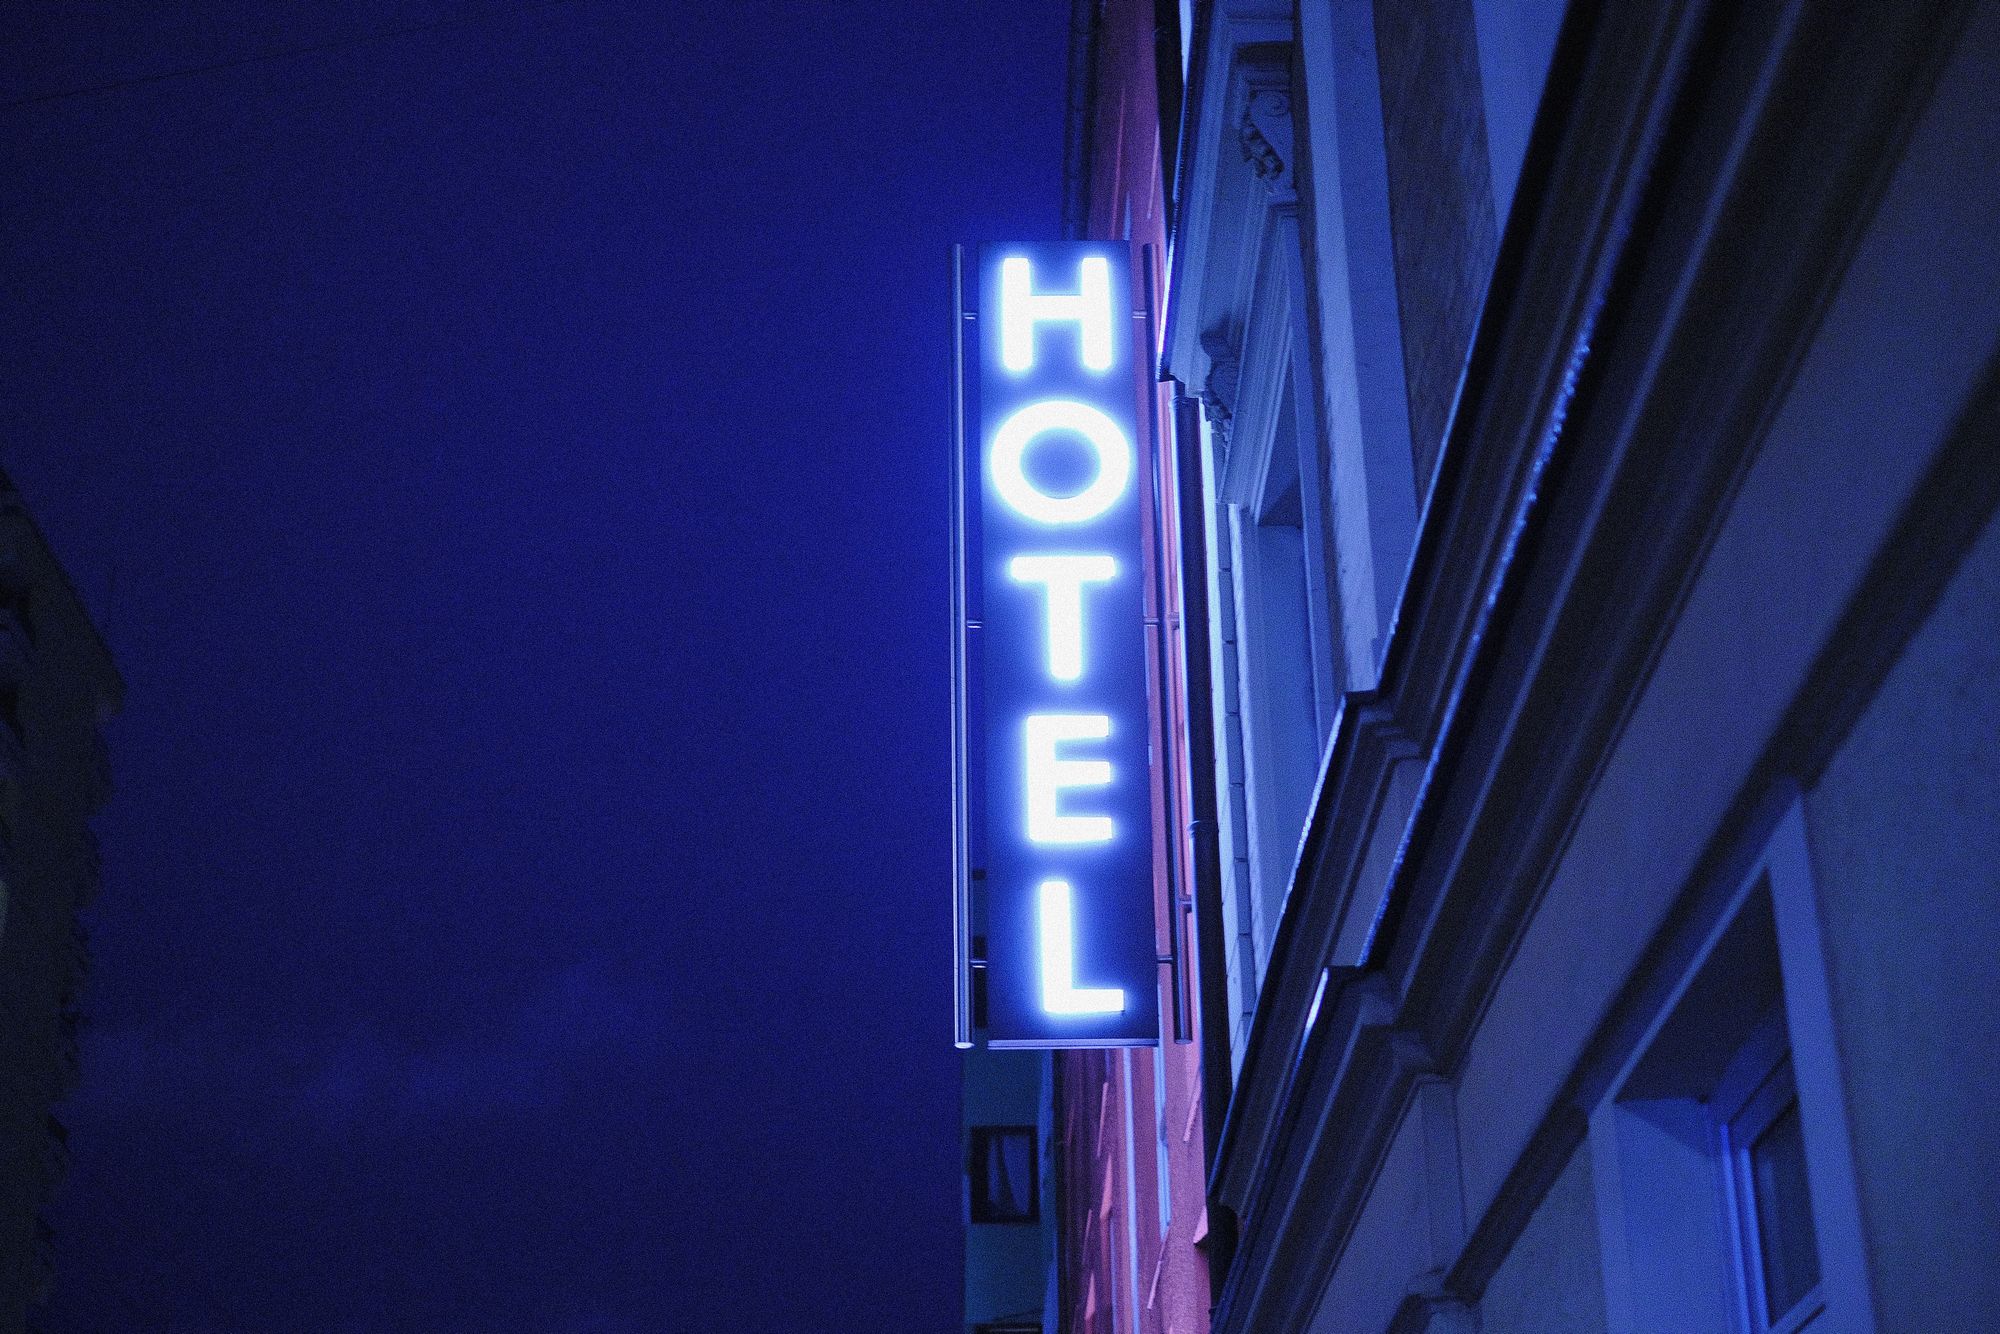 Hotel Loyalty Program: A Step-by-Step Guide for Hoteliers